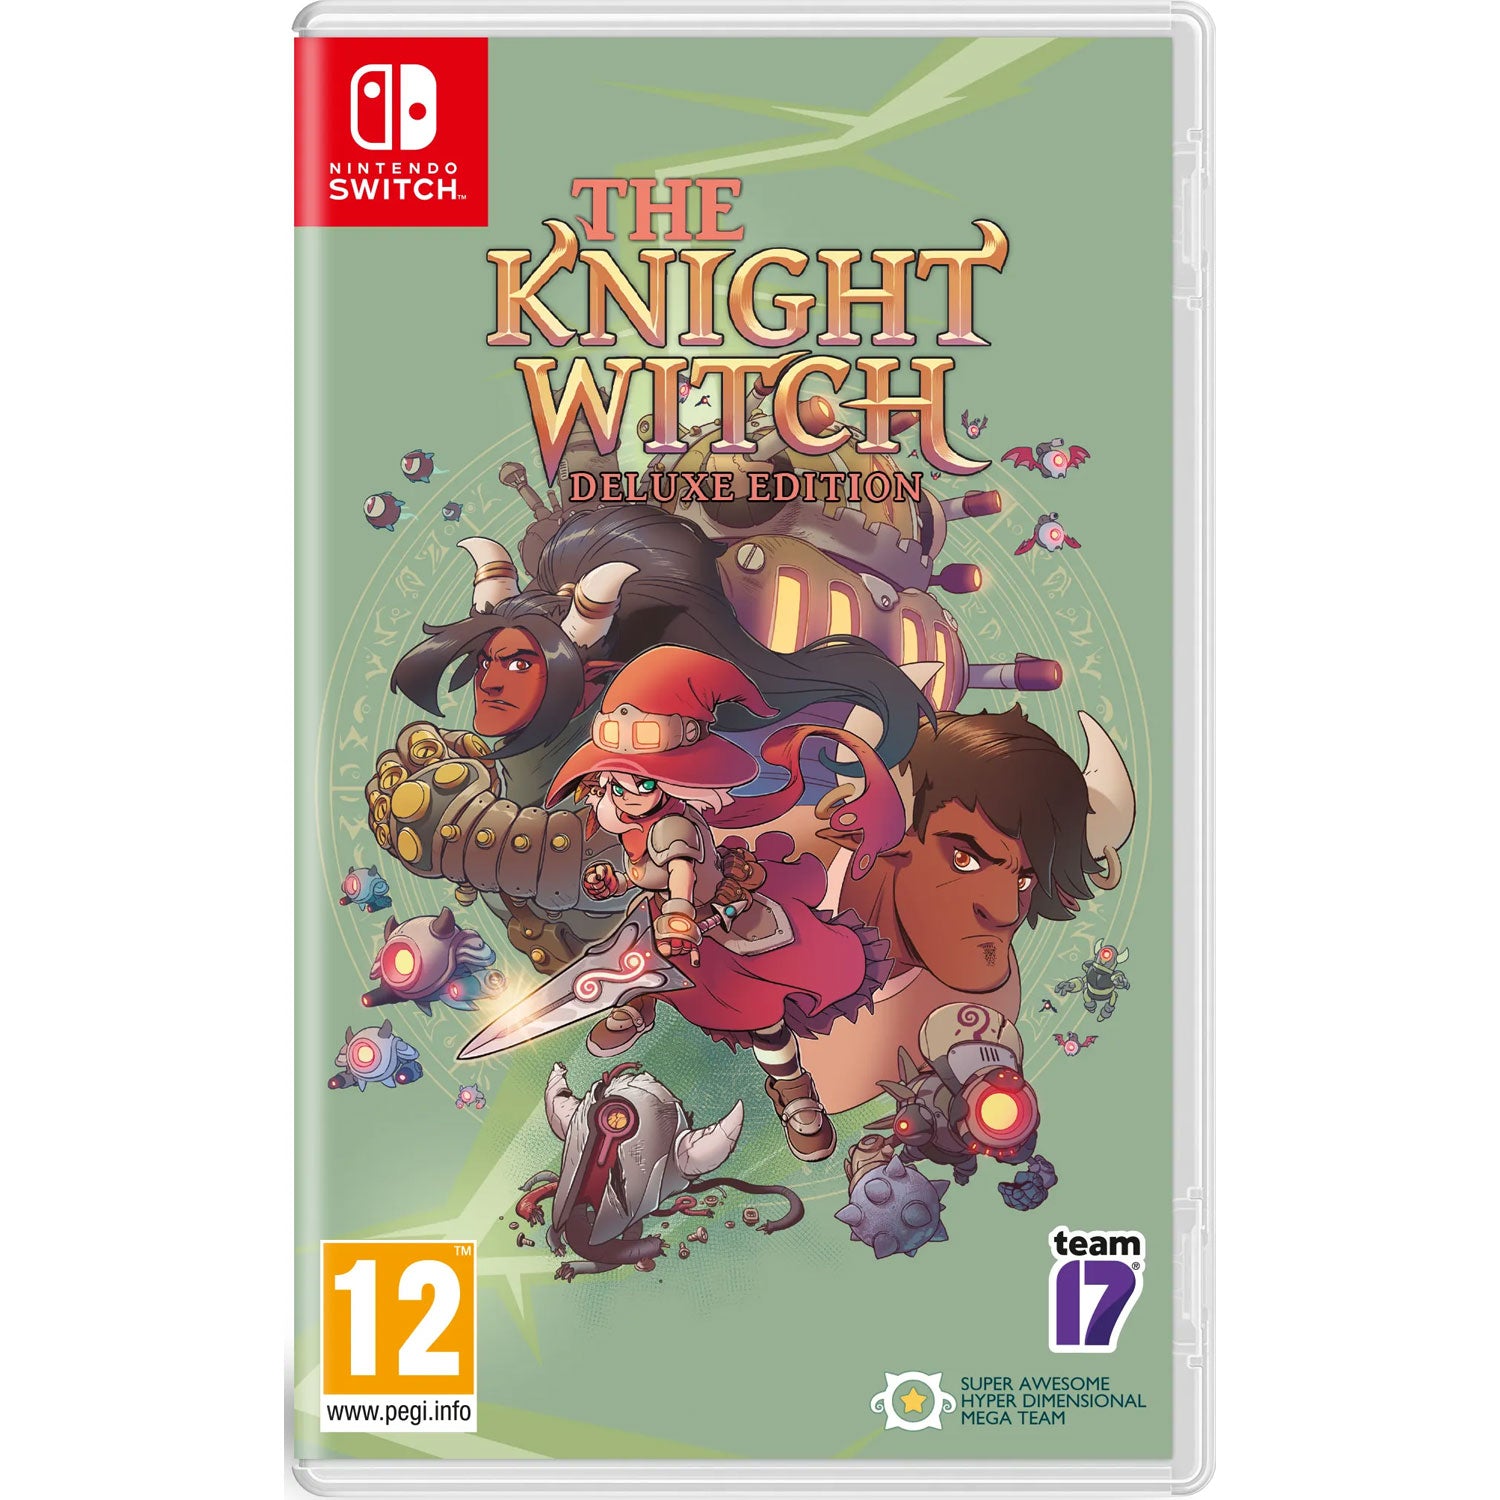 Nintendo Switch The Knight Witch Deluxe Edition